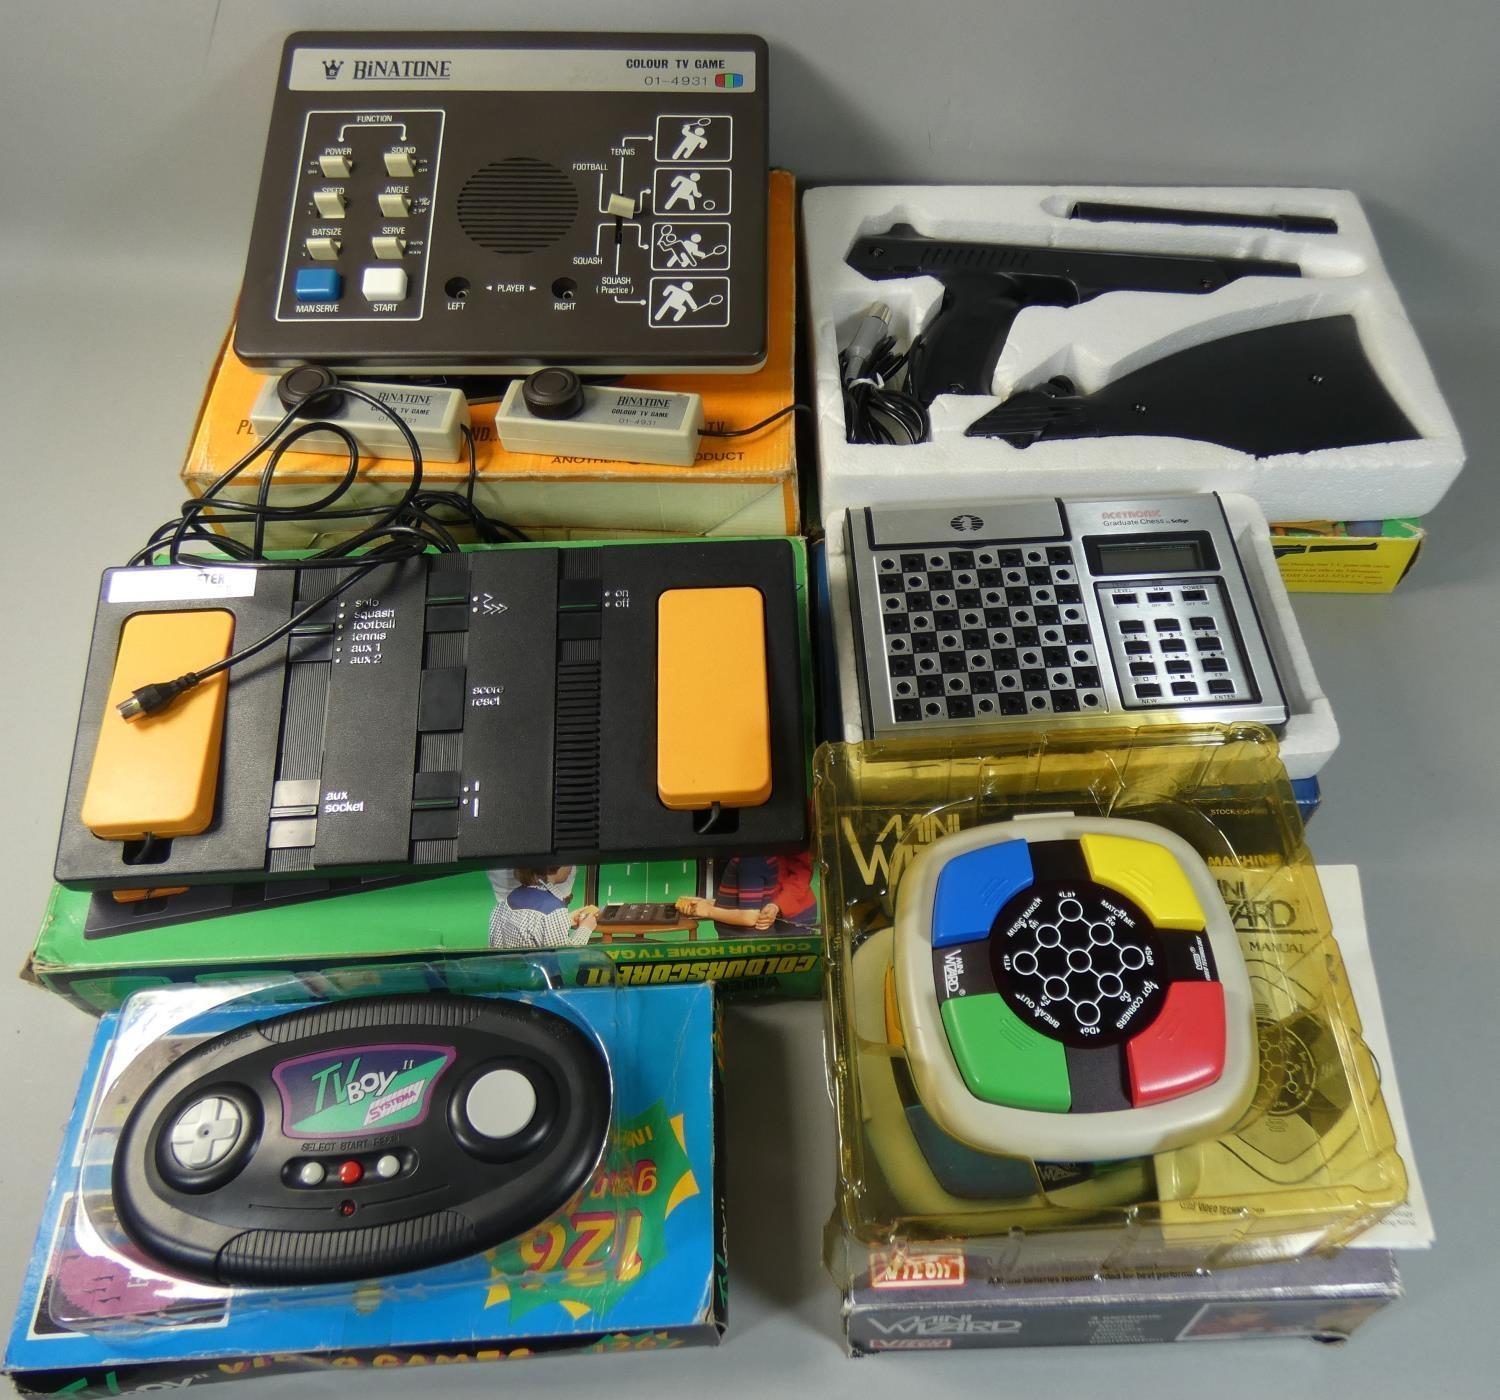 A boxed Binatone colour television game, model No. 01/4931, together with other boxed games